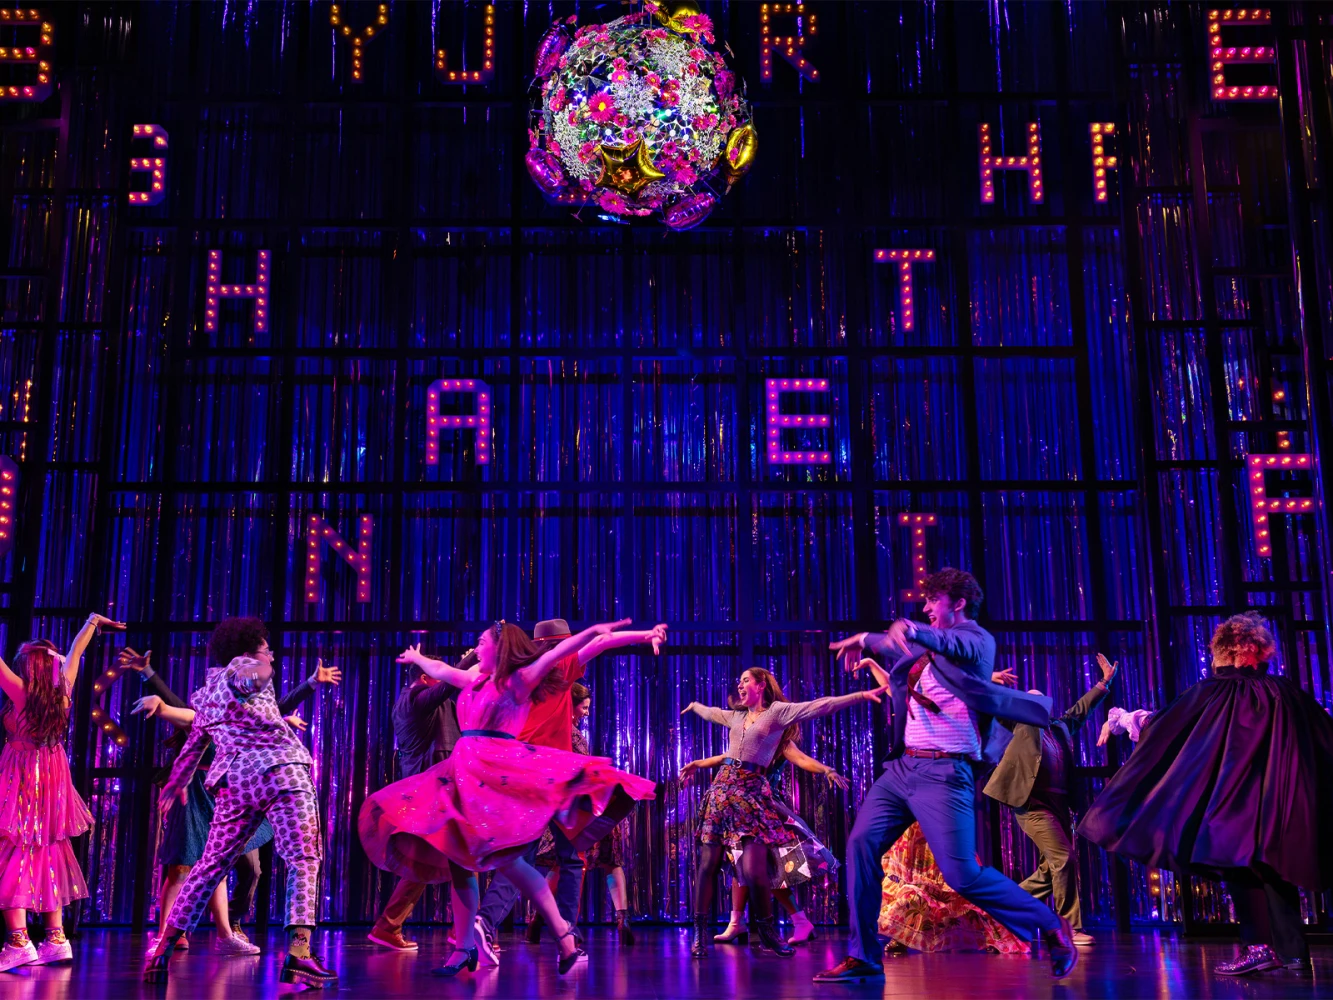 How to Dance in Ohio on Broadway: What to expect - 3